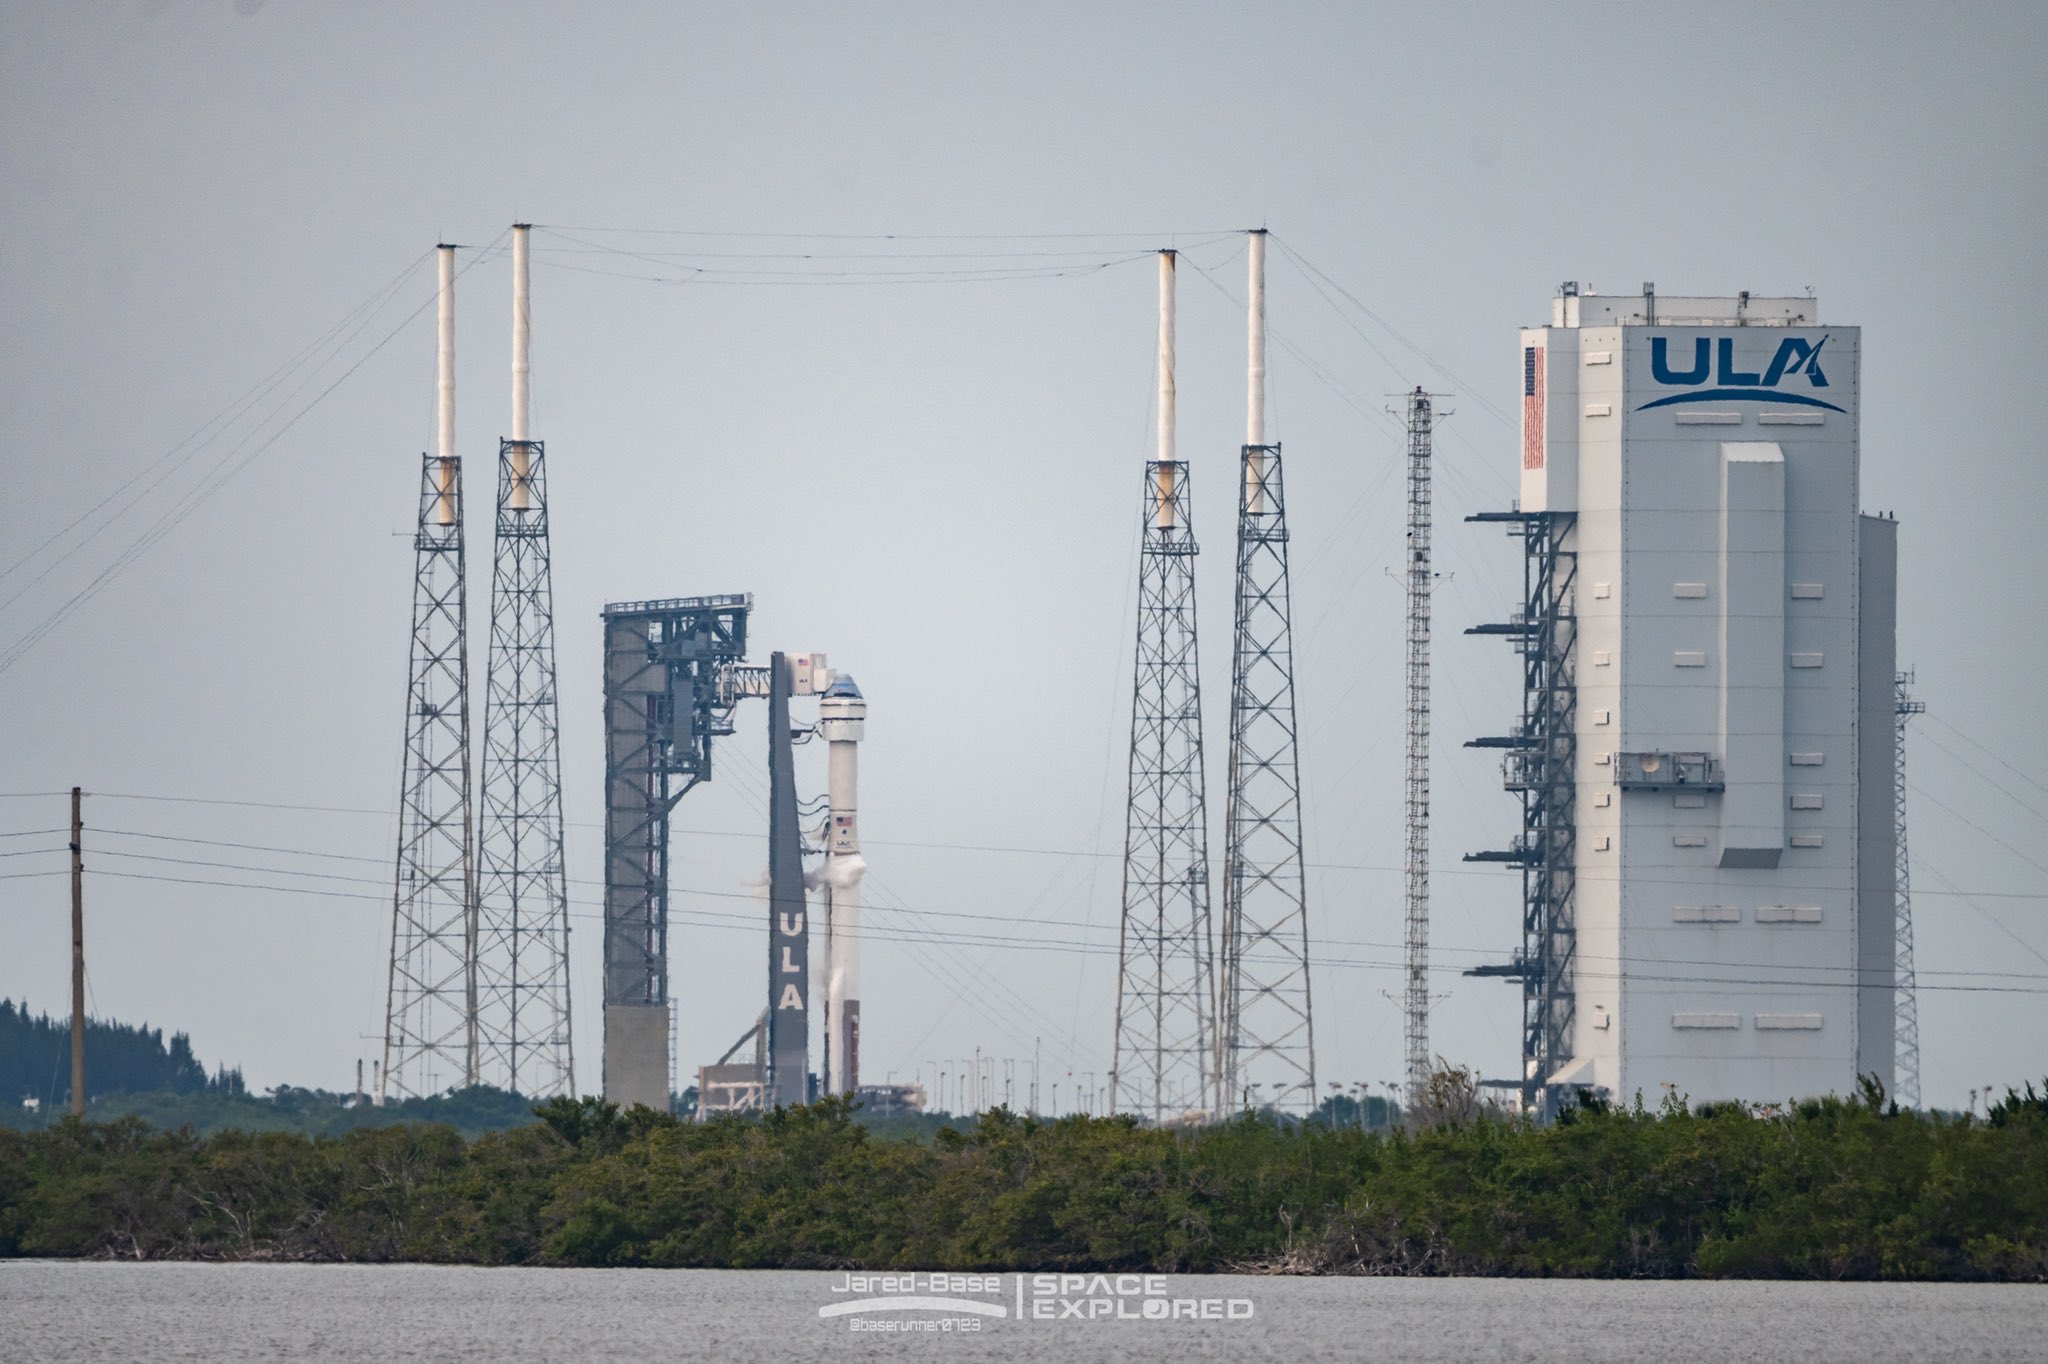 Atlas V on the pad for OFT-2